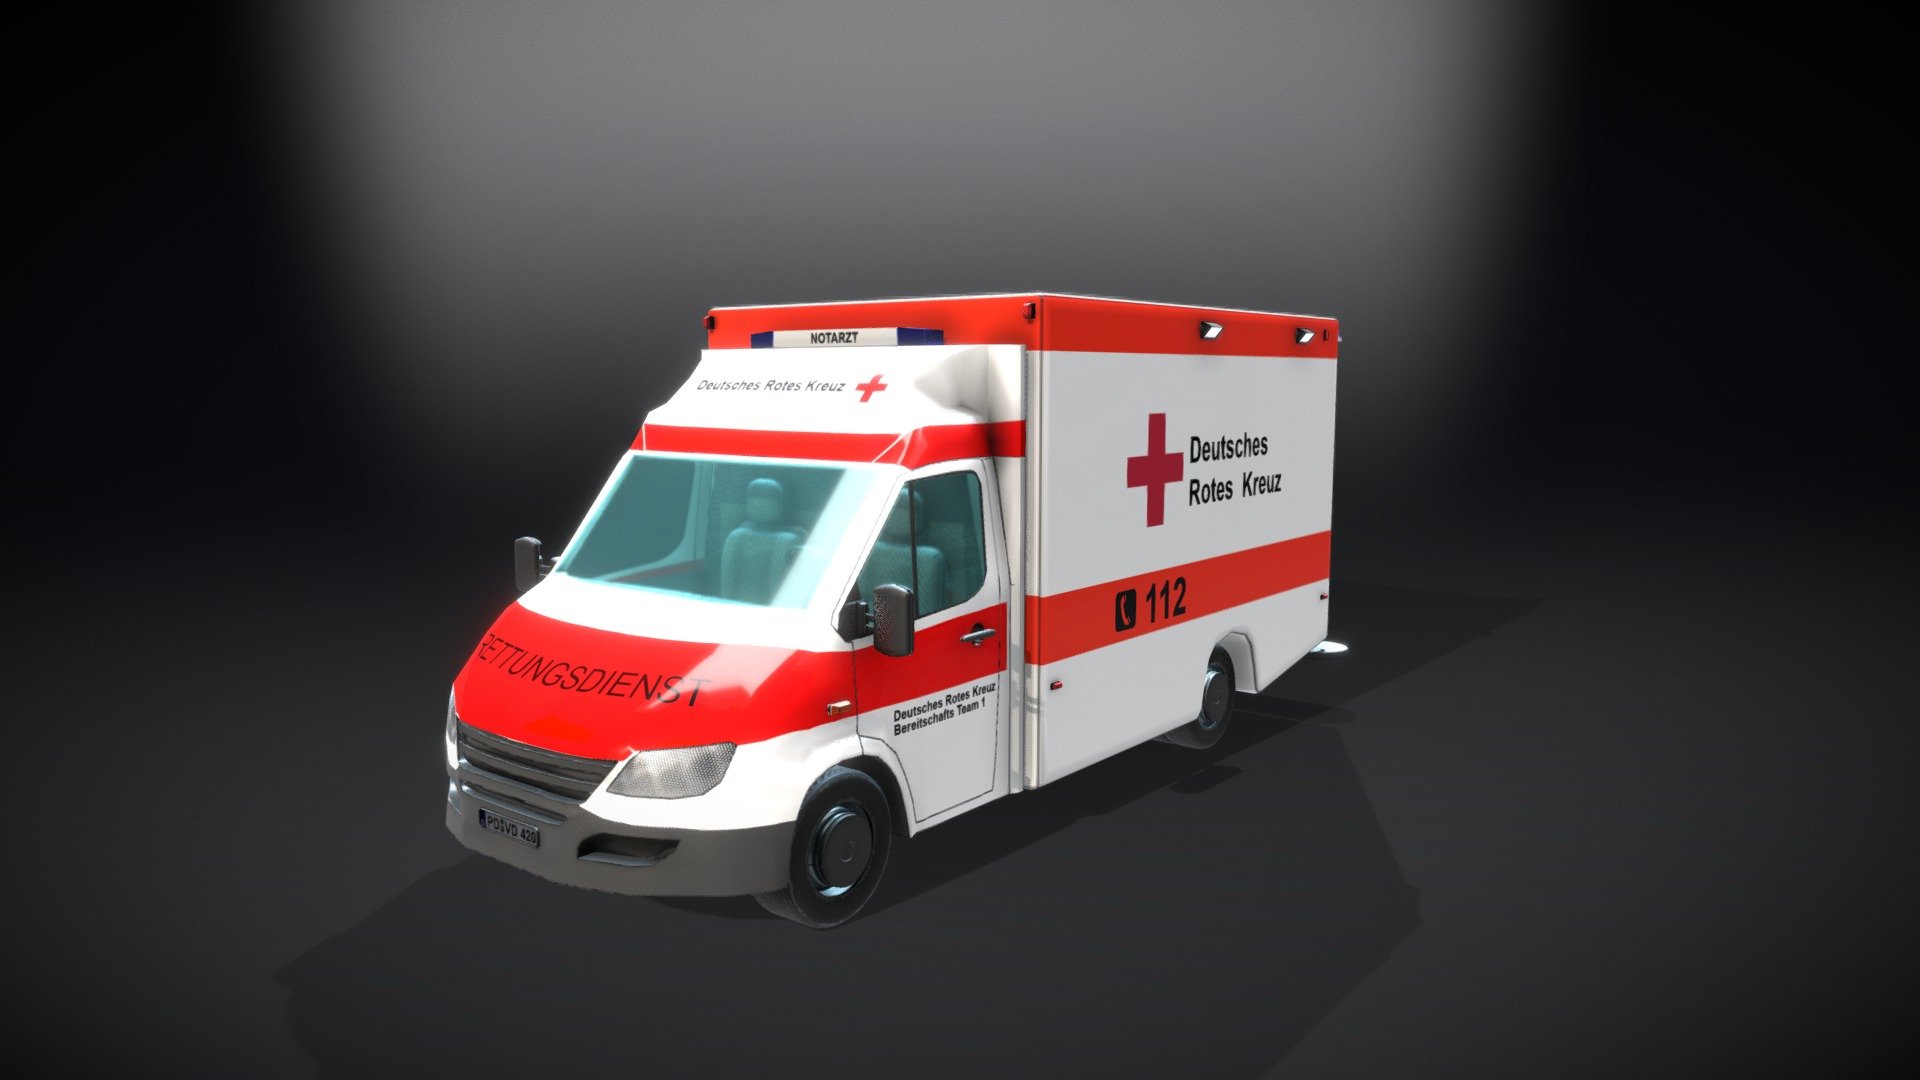 We use this model in our Game: Photonic Distress

Mercedes Sprinter 413
    Rettungswagen
    Krankenwagen

Model by: Spaehling

Website: https://www.grip420.com/

Discord: Follow us on Discord

Facebook Follow us on Facebook - Rettungswagen / Krankenwagen /  Ambulance - Download Free 3D model by GRIP420 3d model